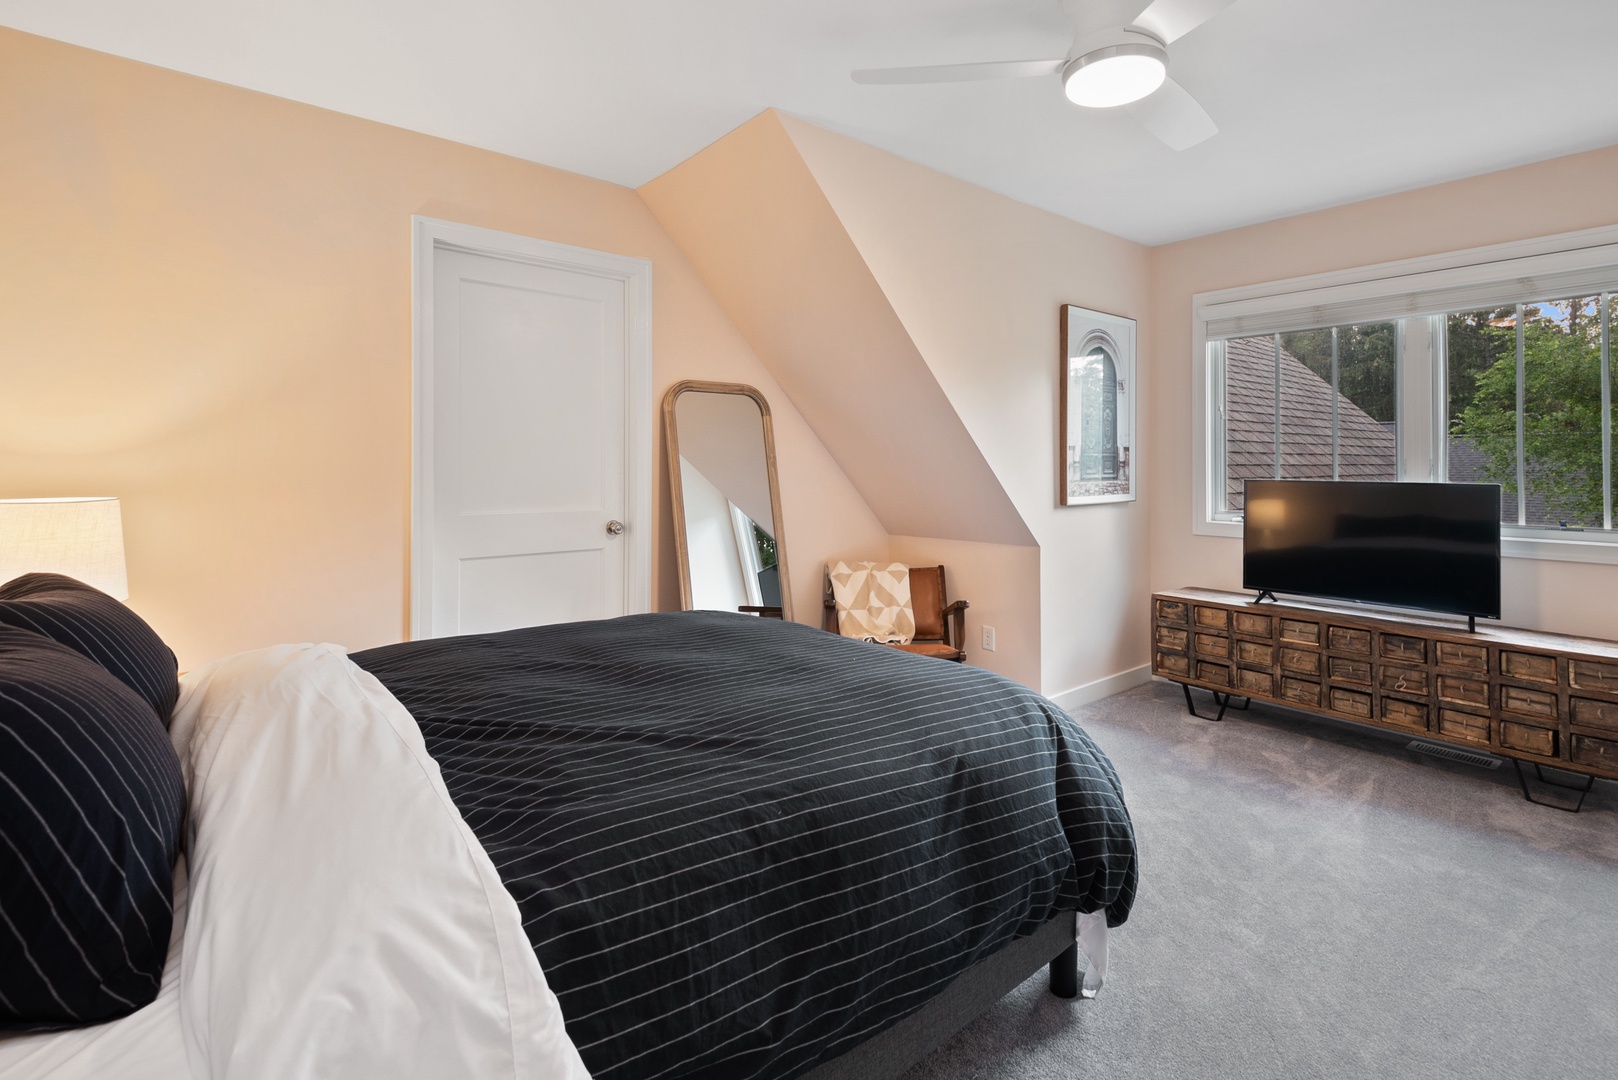 With 4 private bedrooms, The Douglas Darling has plenty of space for everyone to spread out.